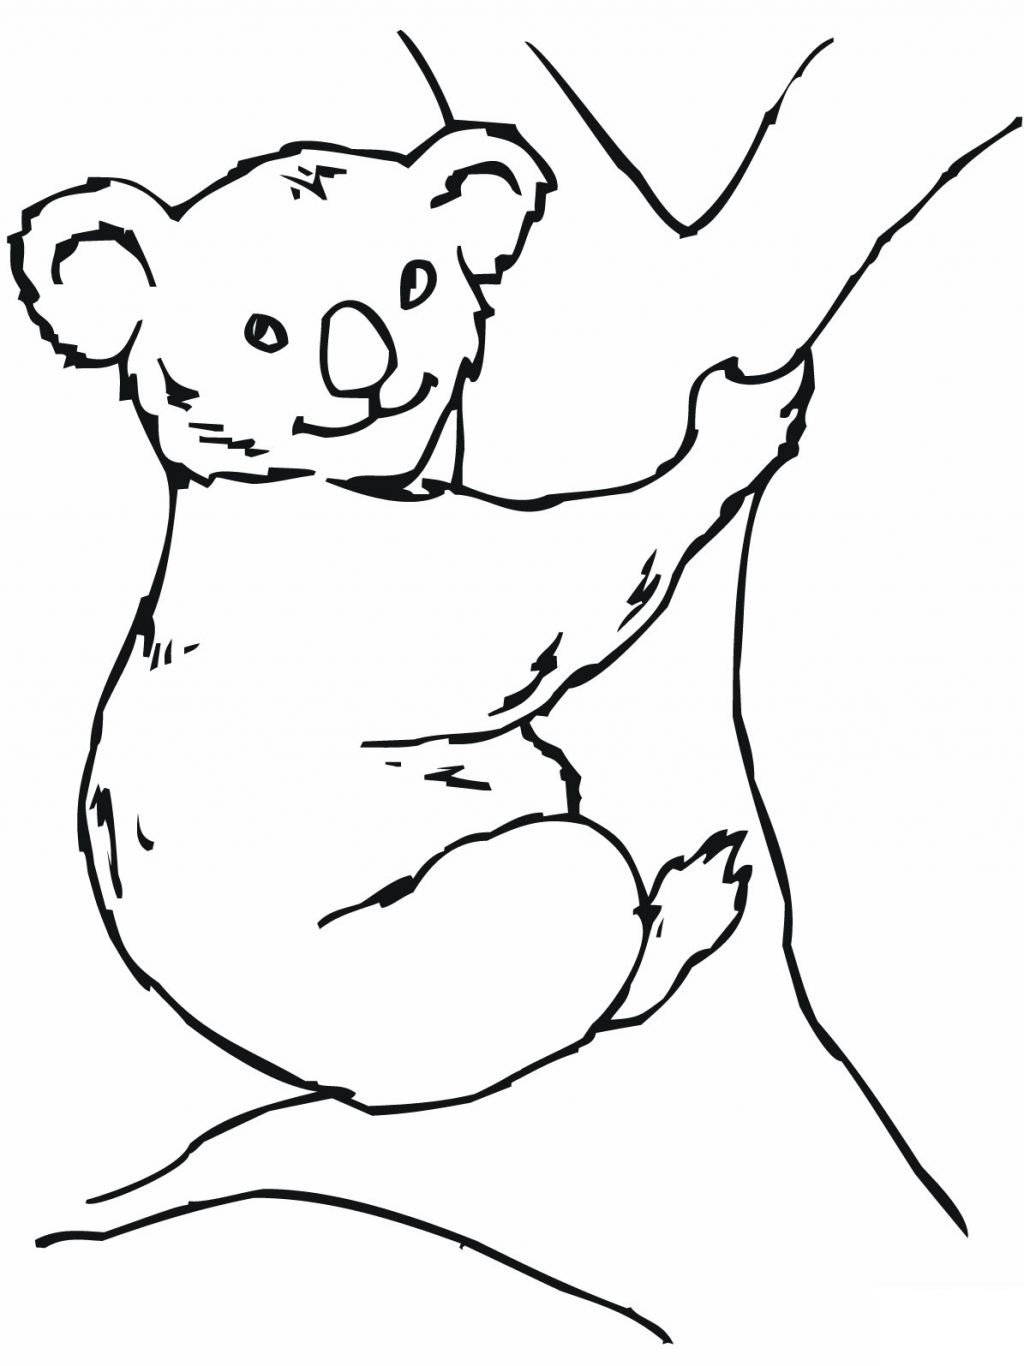 Download Free Printable Koala Coloring Pages For Kids